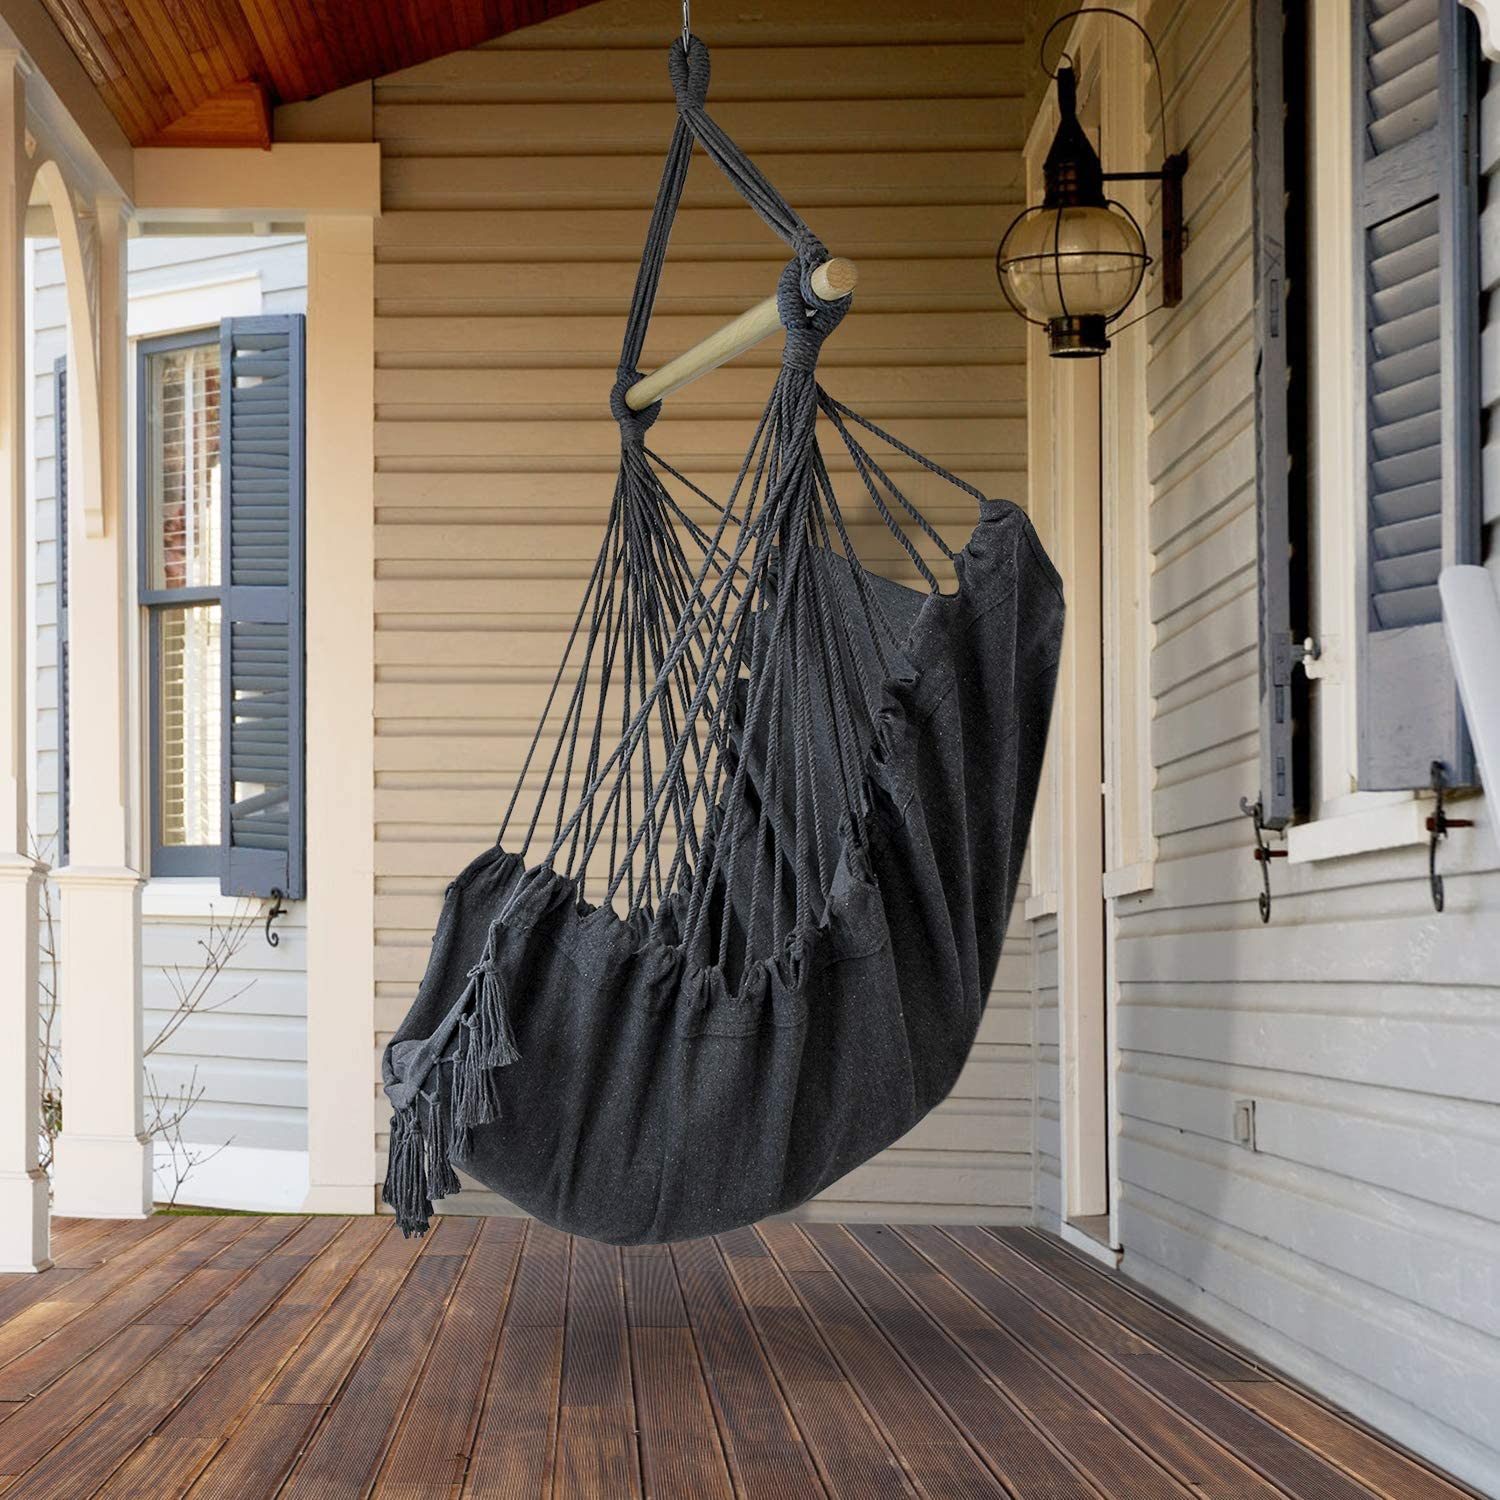 Max-330Lbs150KG-Hammock-Chair-Hanging-Rope-Swing-with-2-Cushions-Included-Large-Tassel-Hanging-Chair-1726402-2